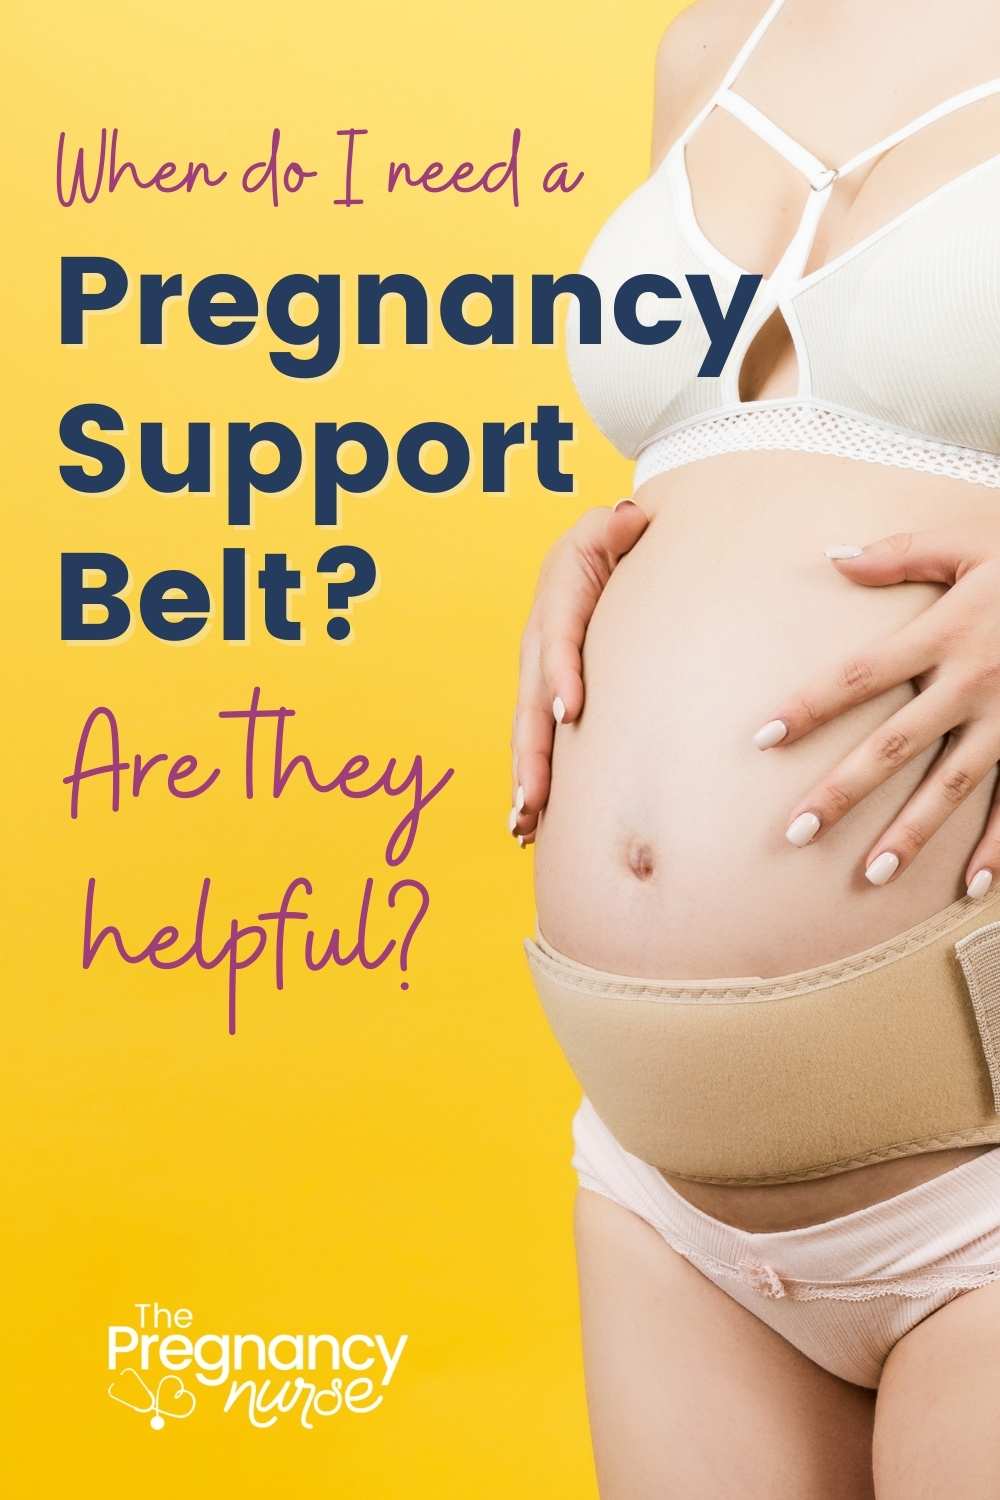 Pregnancy can be an uncomfortable time, but using belly straps can help support your stomach and back, which can relieve some of the pain and discomfort. In this blog post, we will discuss the different types of belly straps available and how to choose the right one for you. We will also explore some of the benefits of using belly straps during pregnancy.